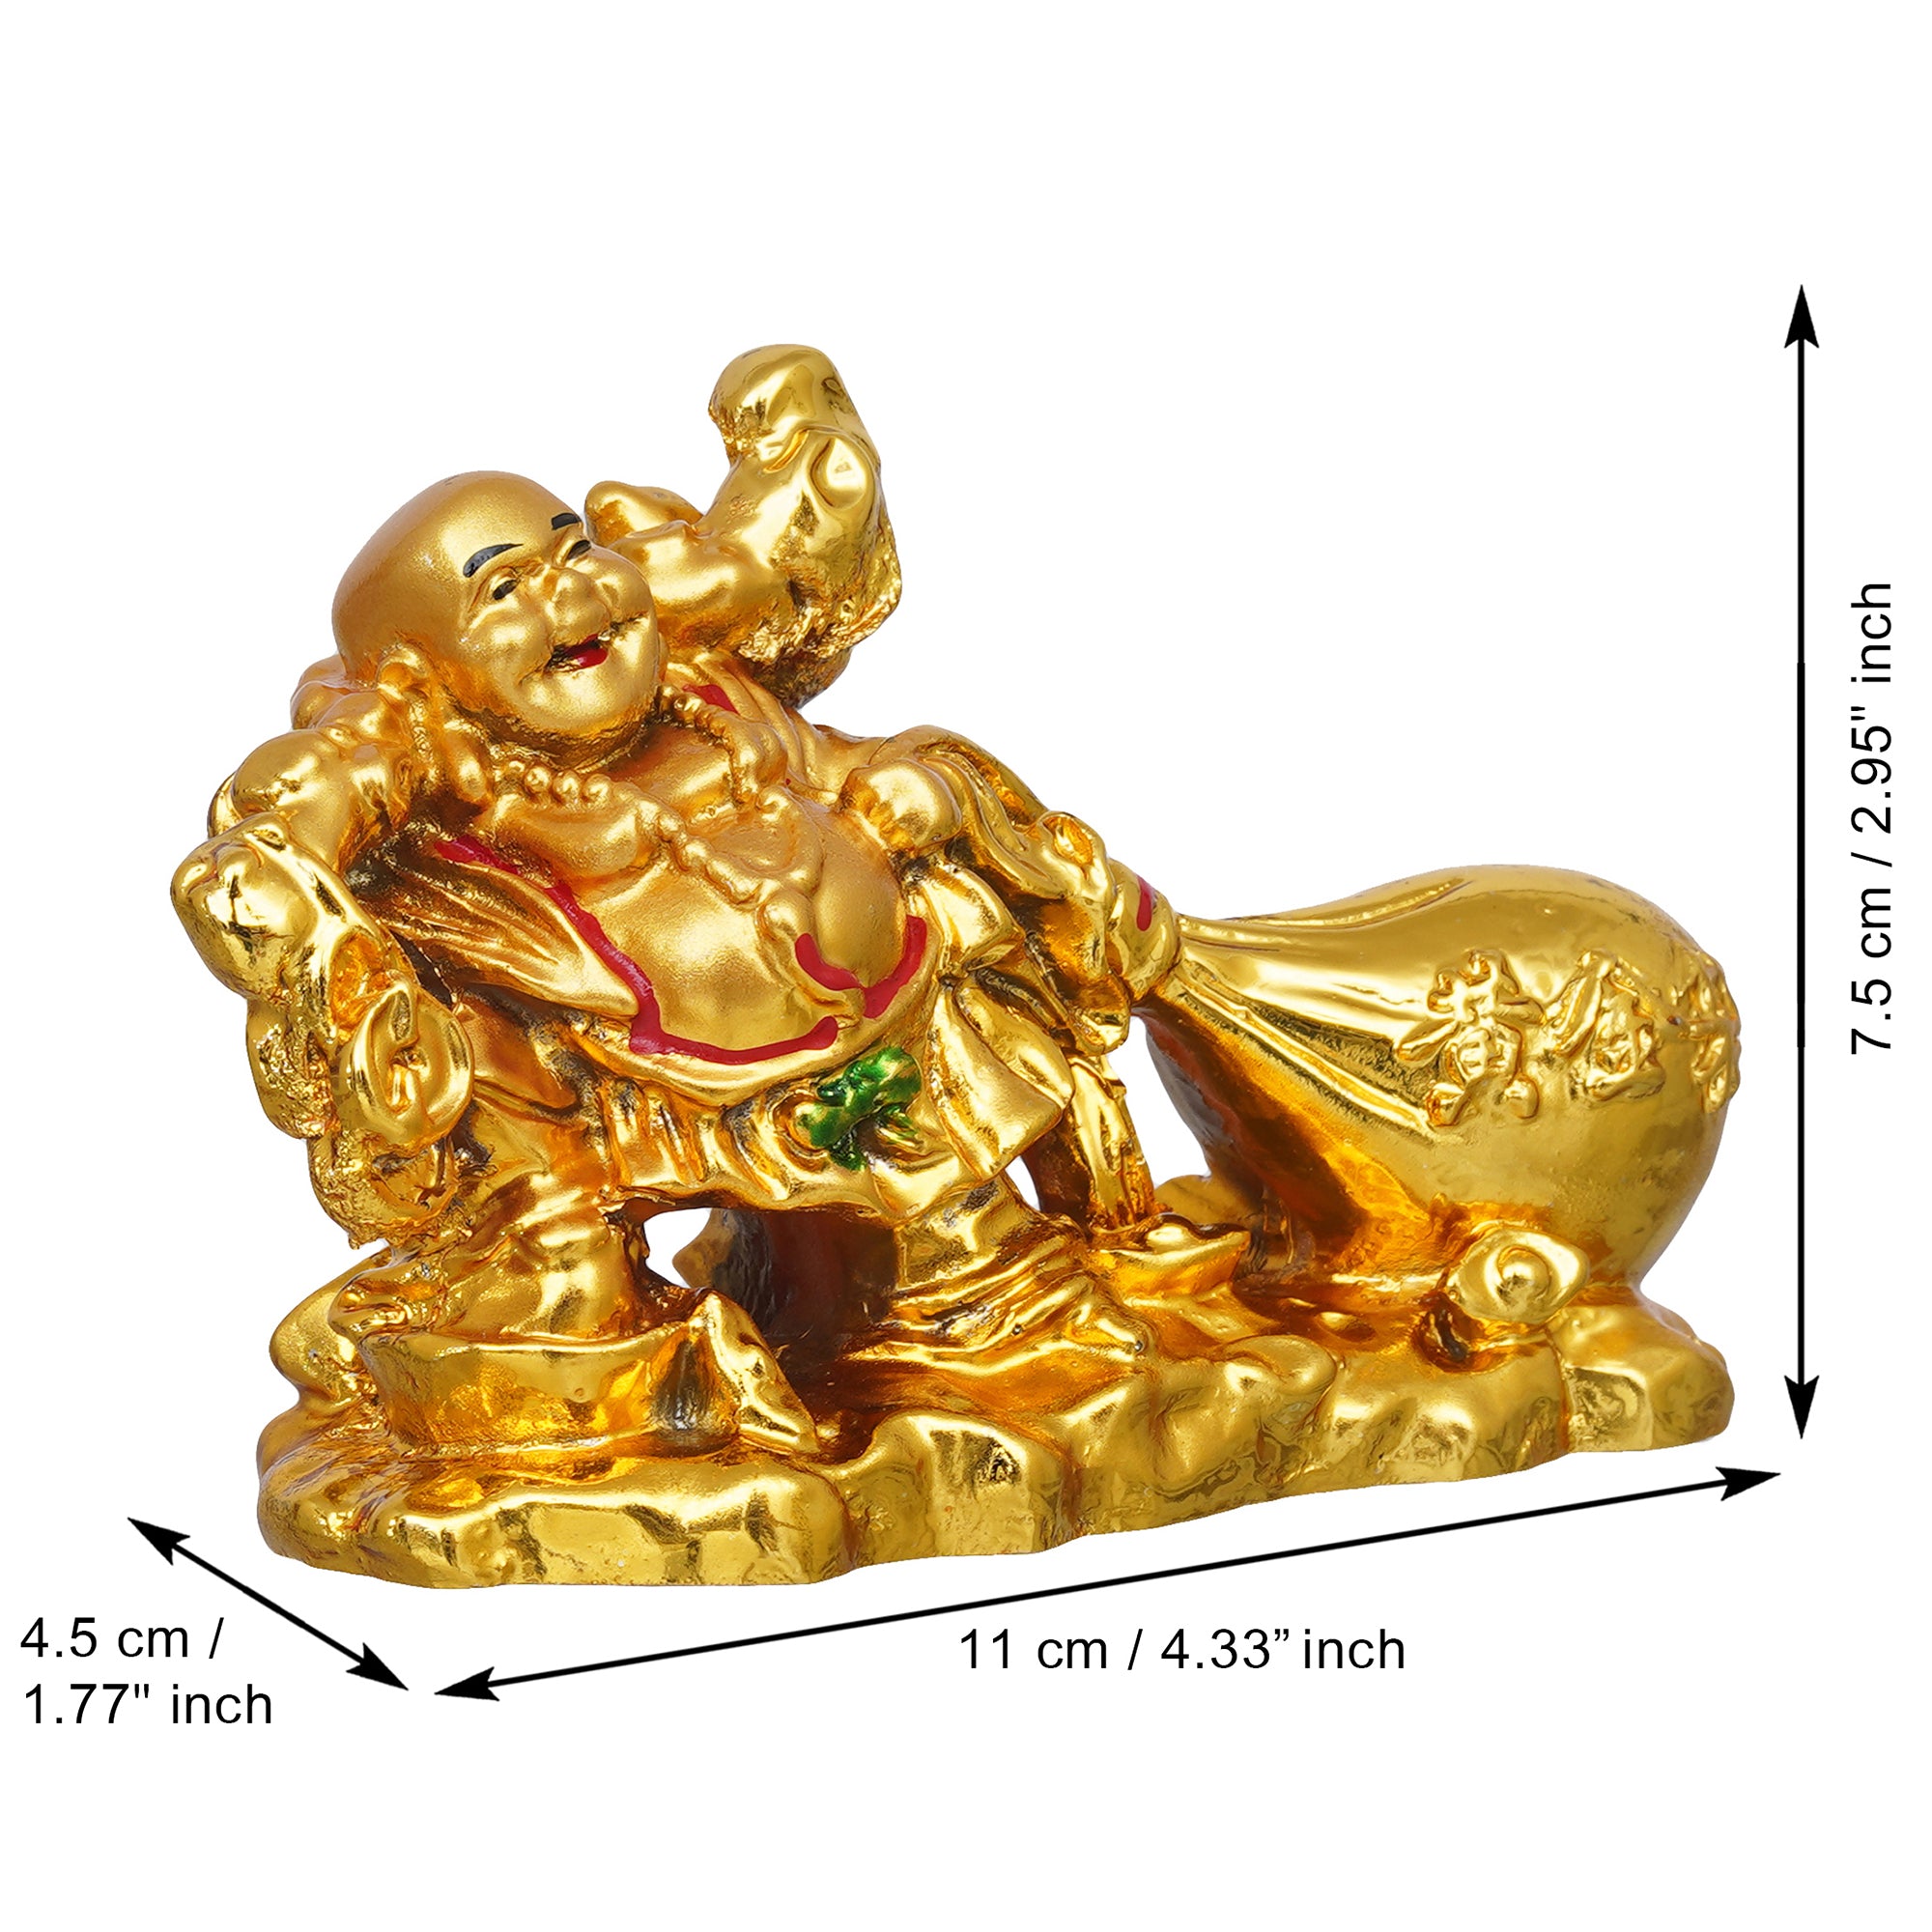 eCraftIndia Golden Polyresin Feng Shui Laughing Buddha Idol with Money Bag For Wealth And Good Luck 3